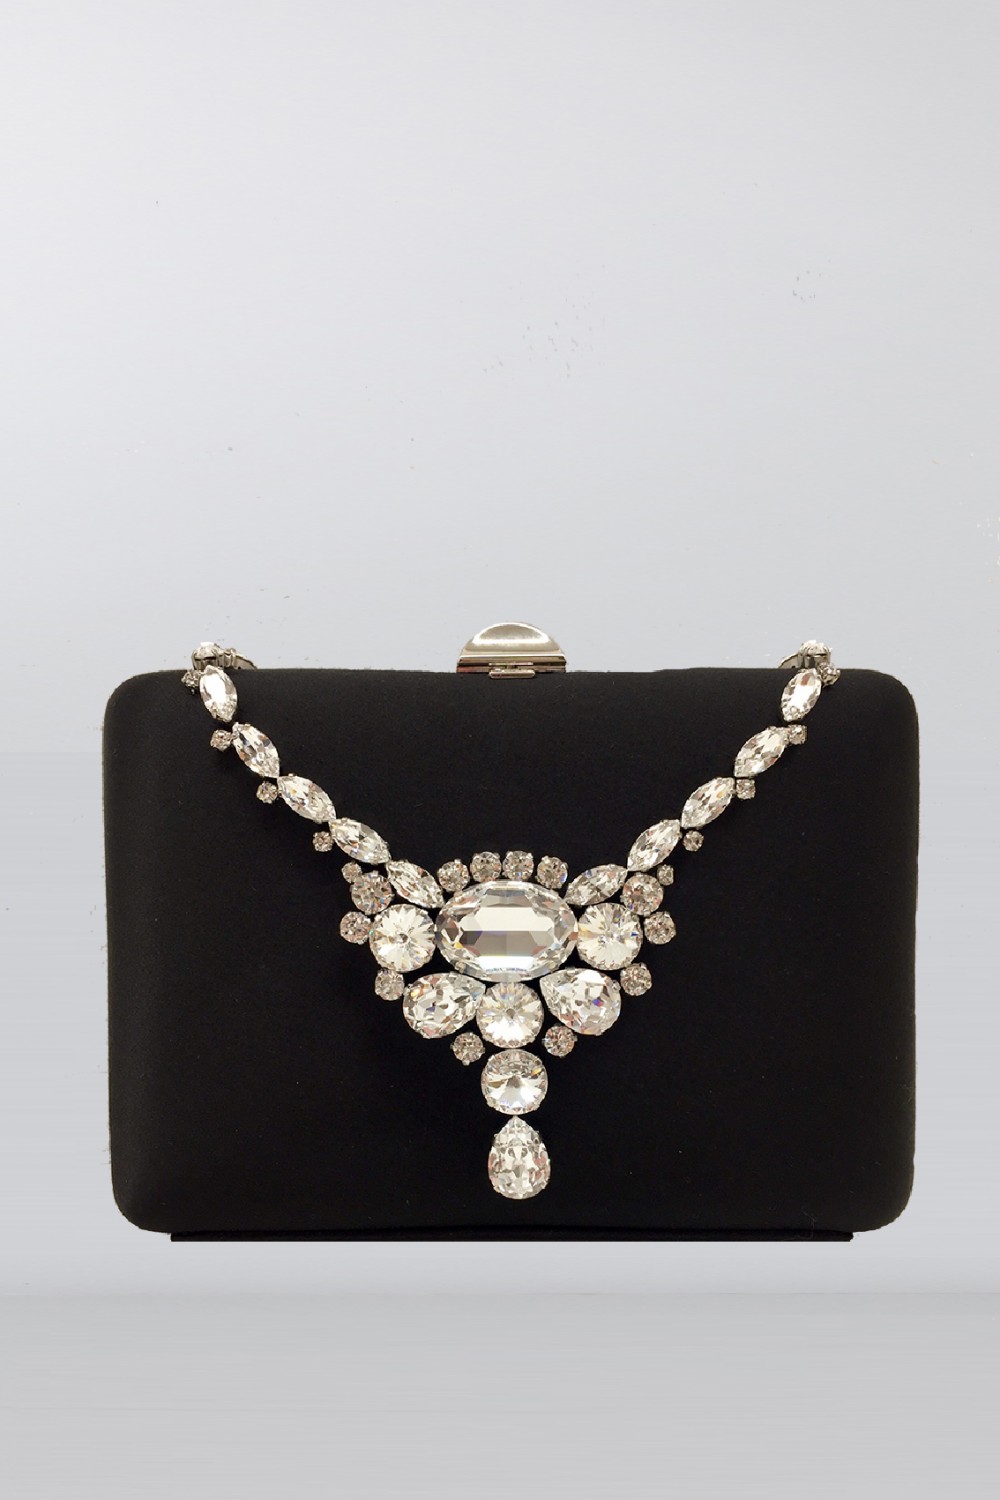 Black clutch with necklace